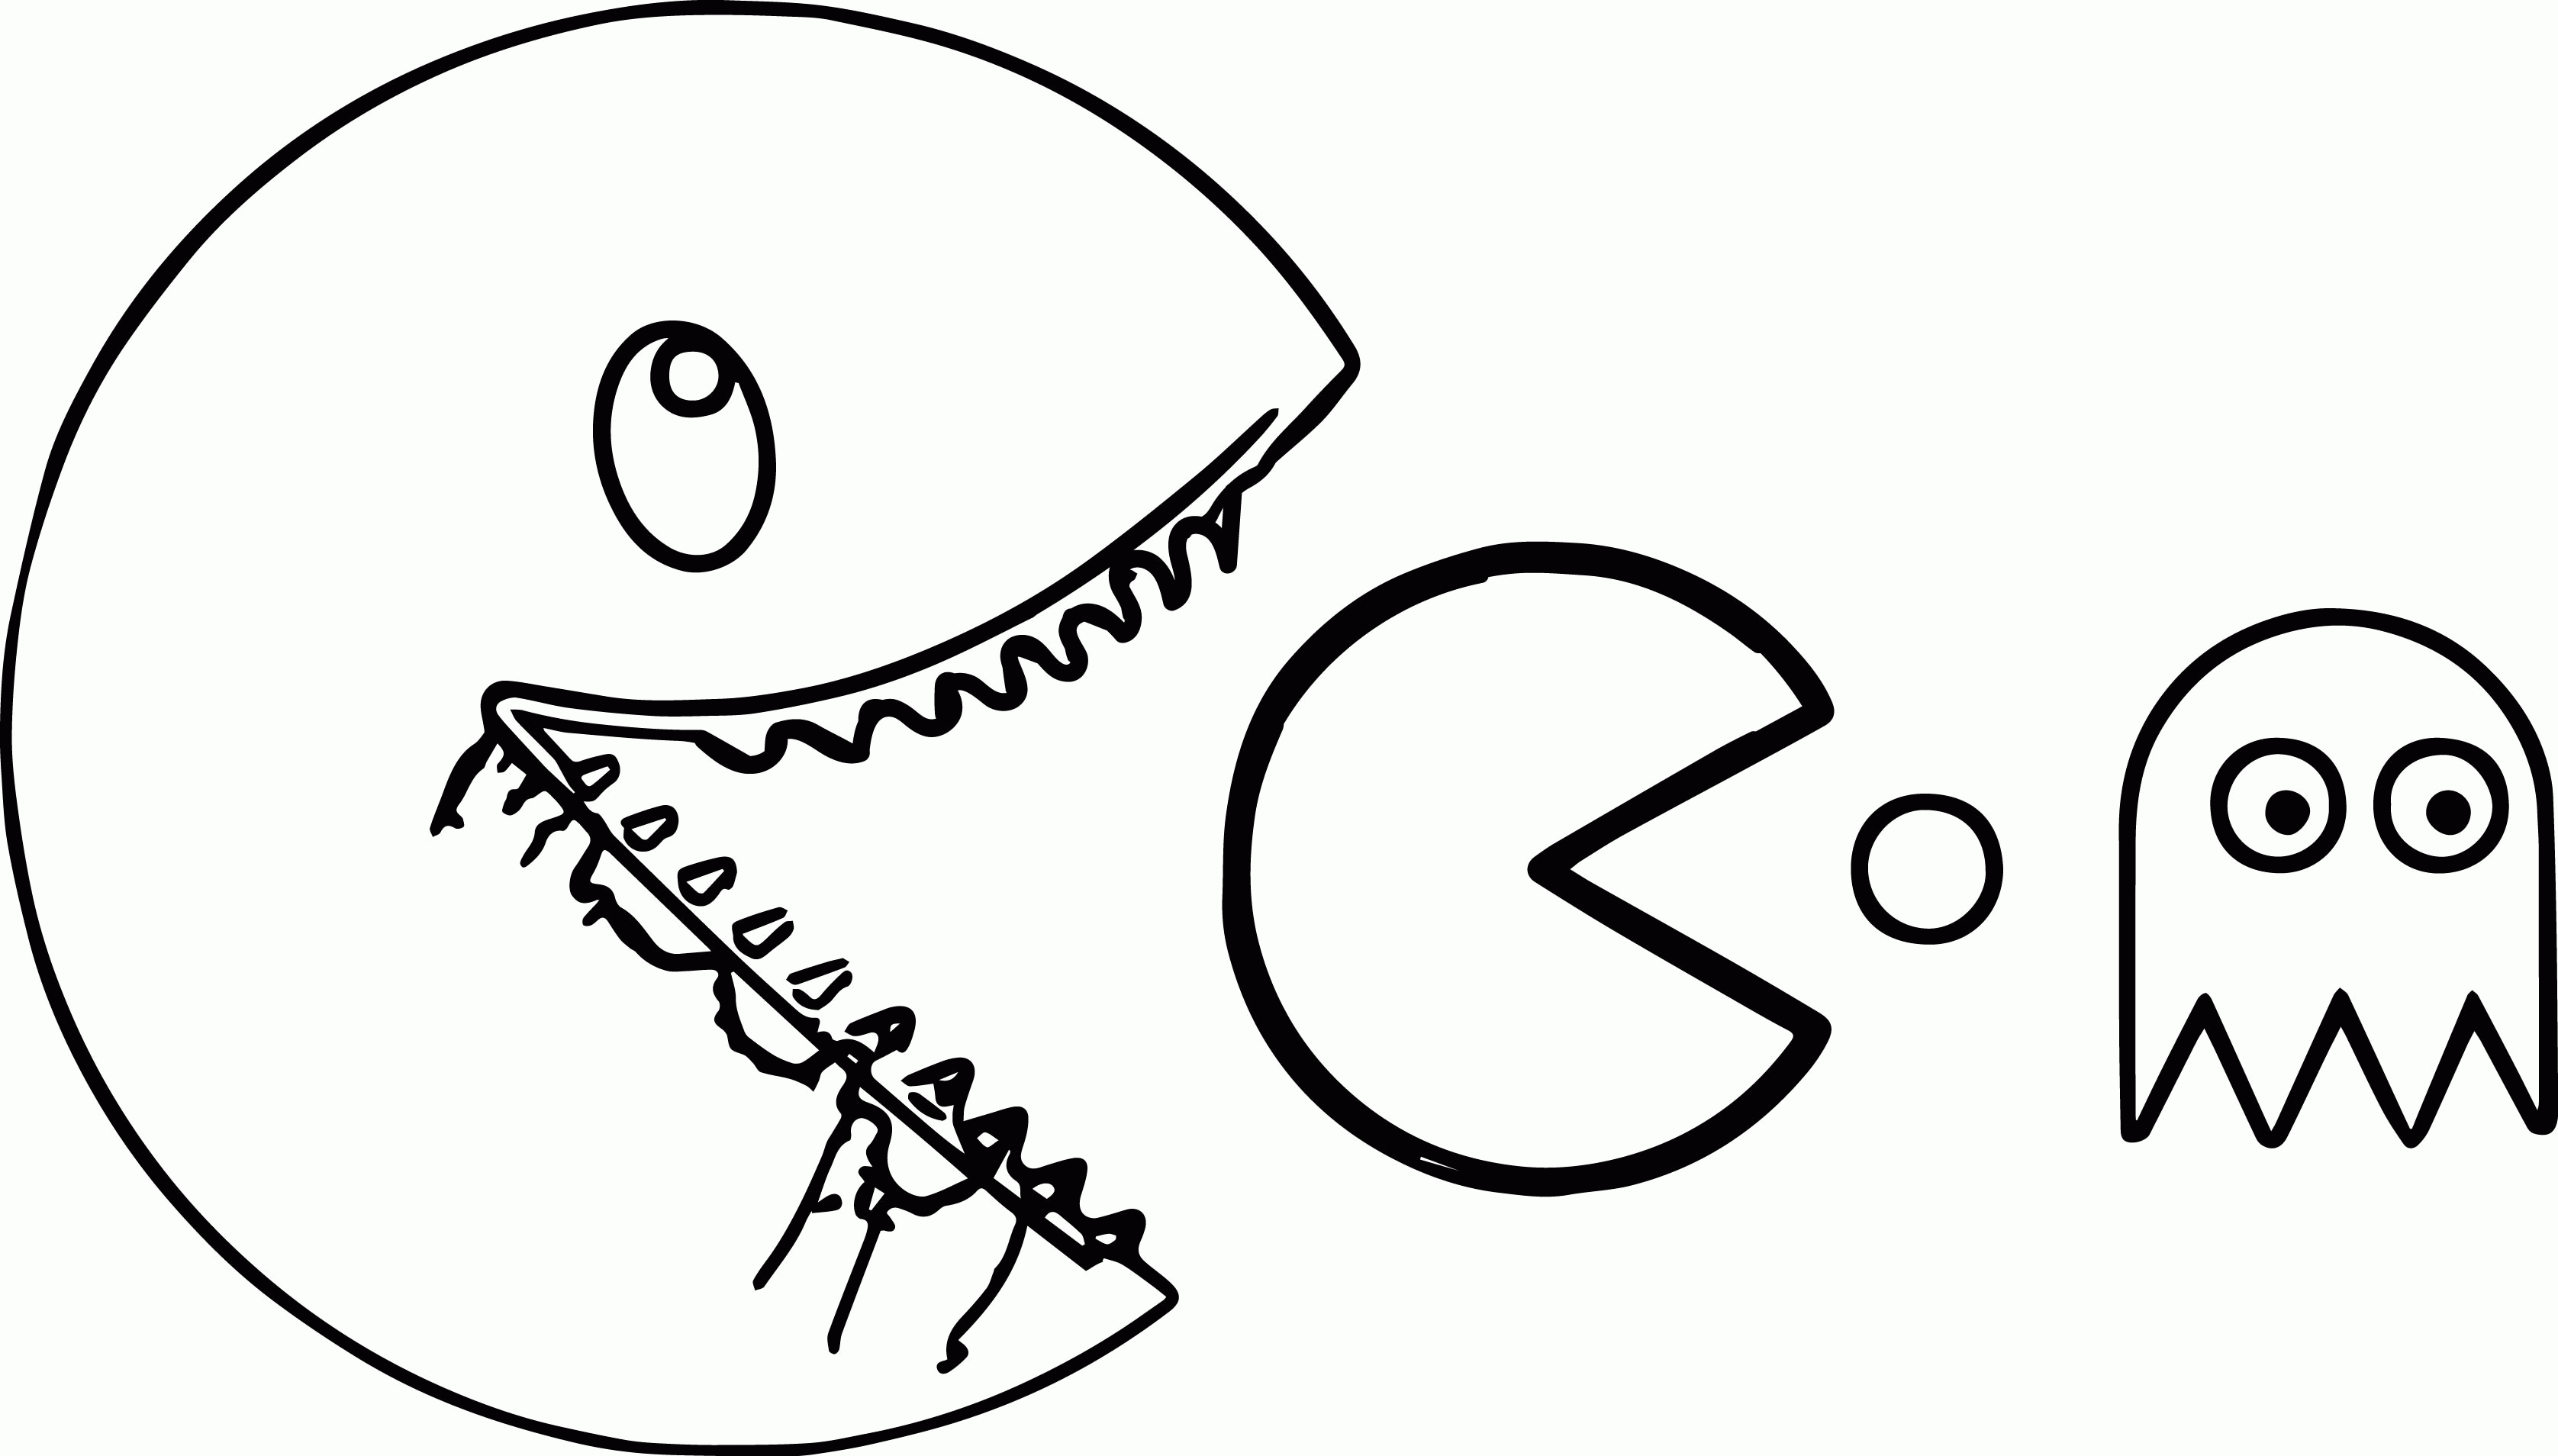 Take Ghost Pacman Coloring Page Wecoloringpage - Widetheme